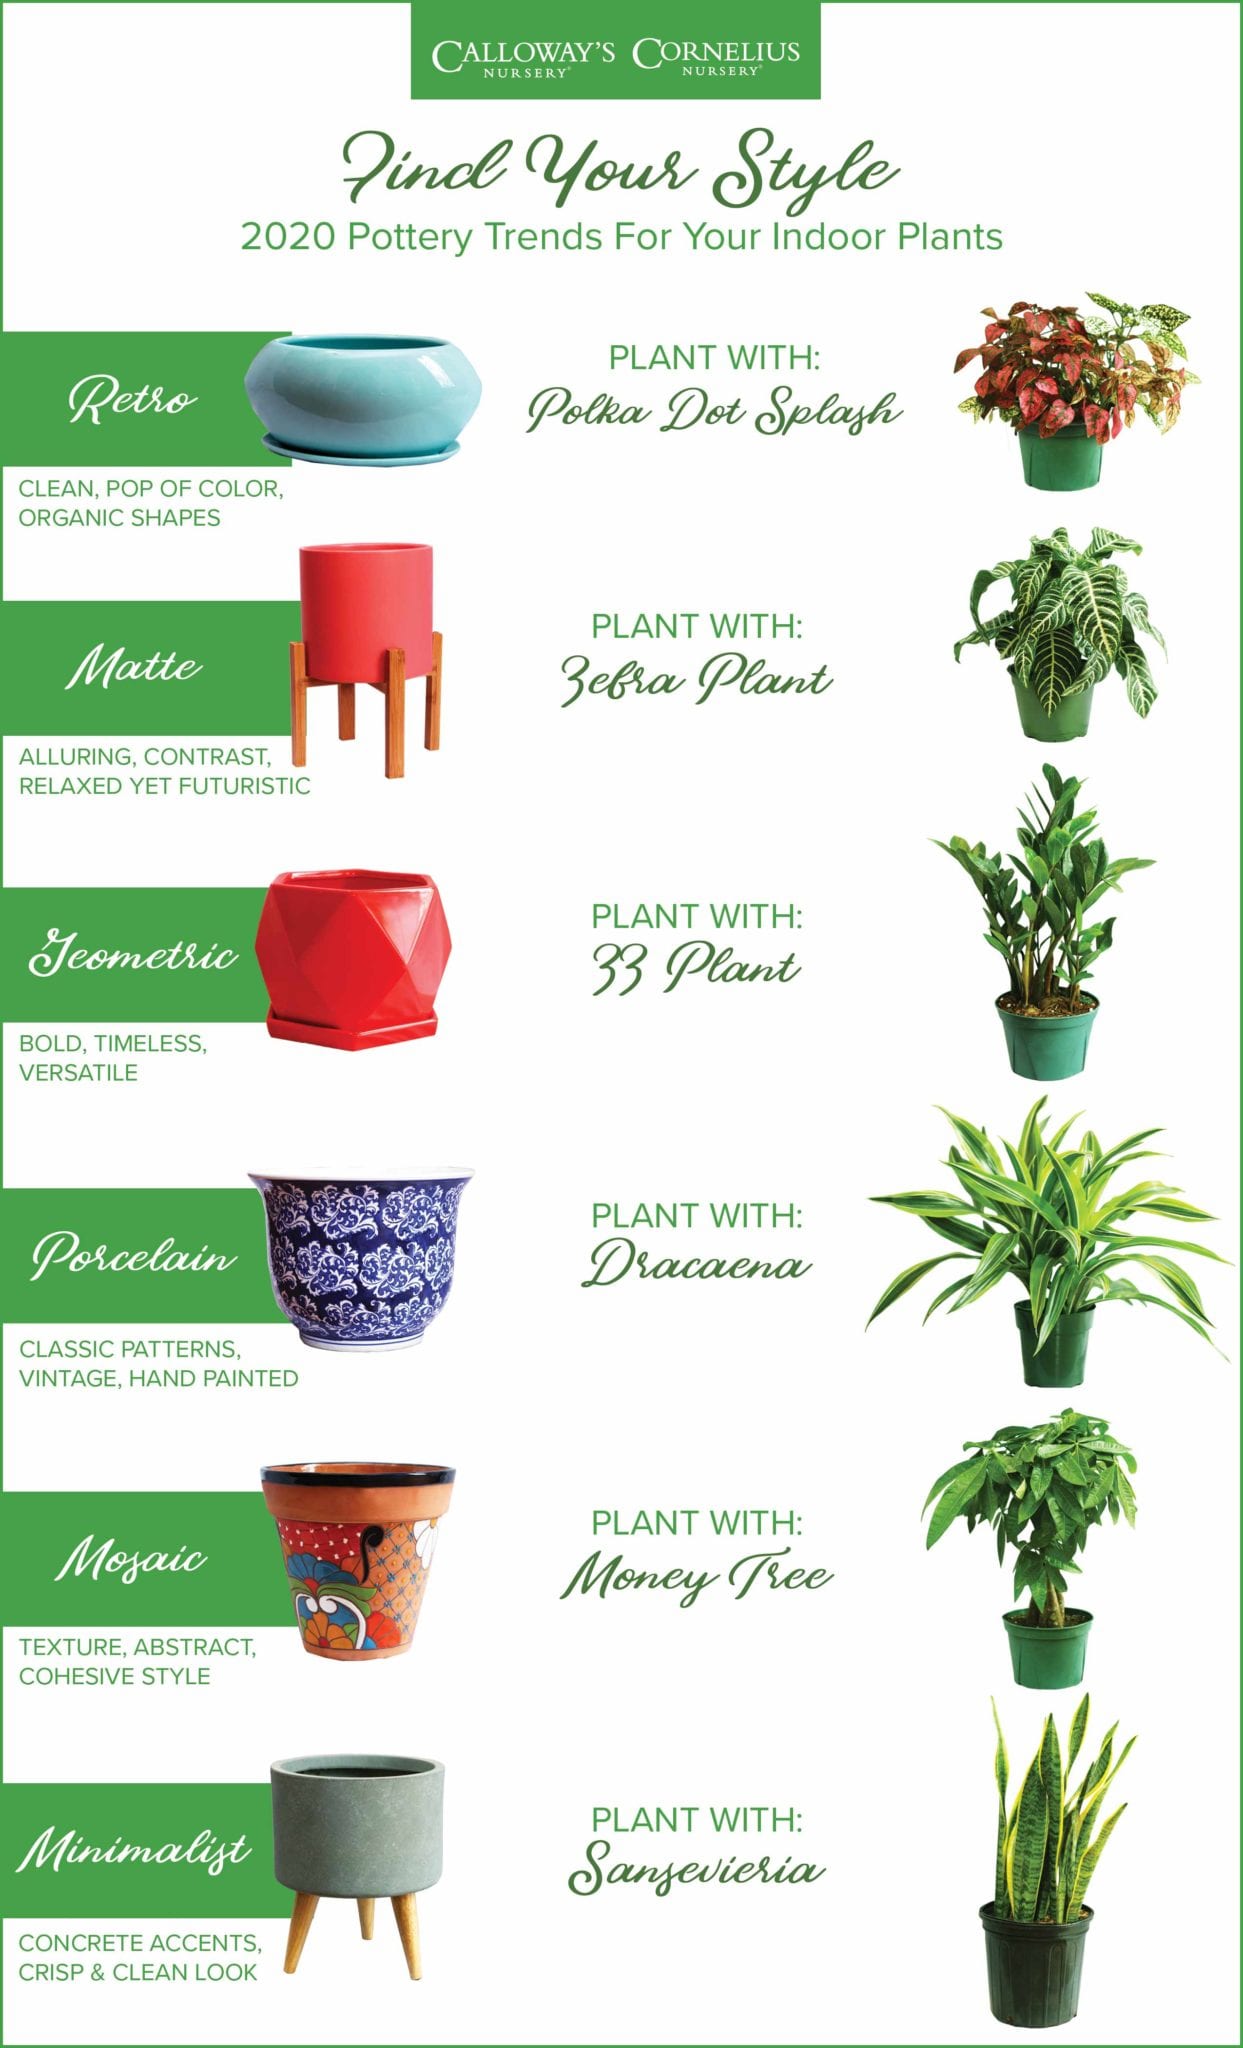 Find Your Style 2020 Pottery Trends For Your Indoor Plants Calloway